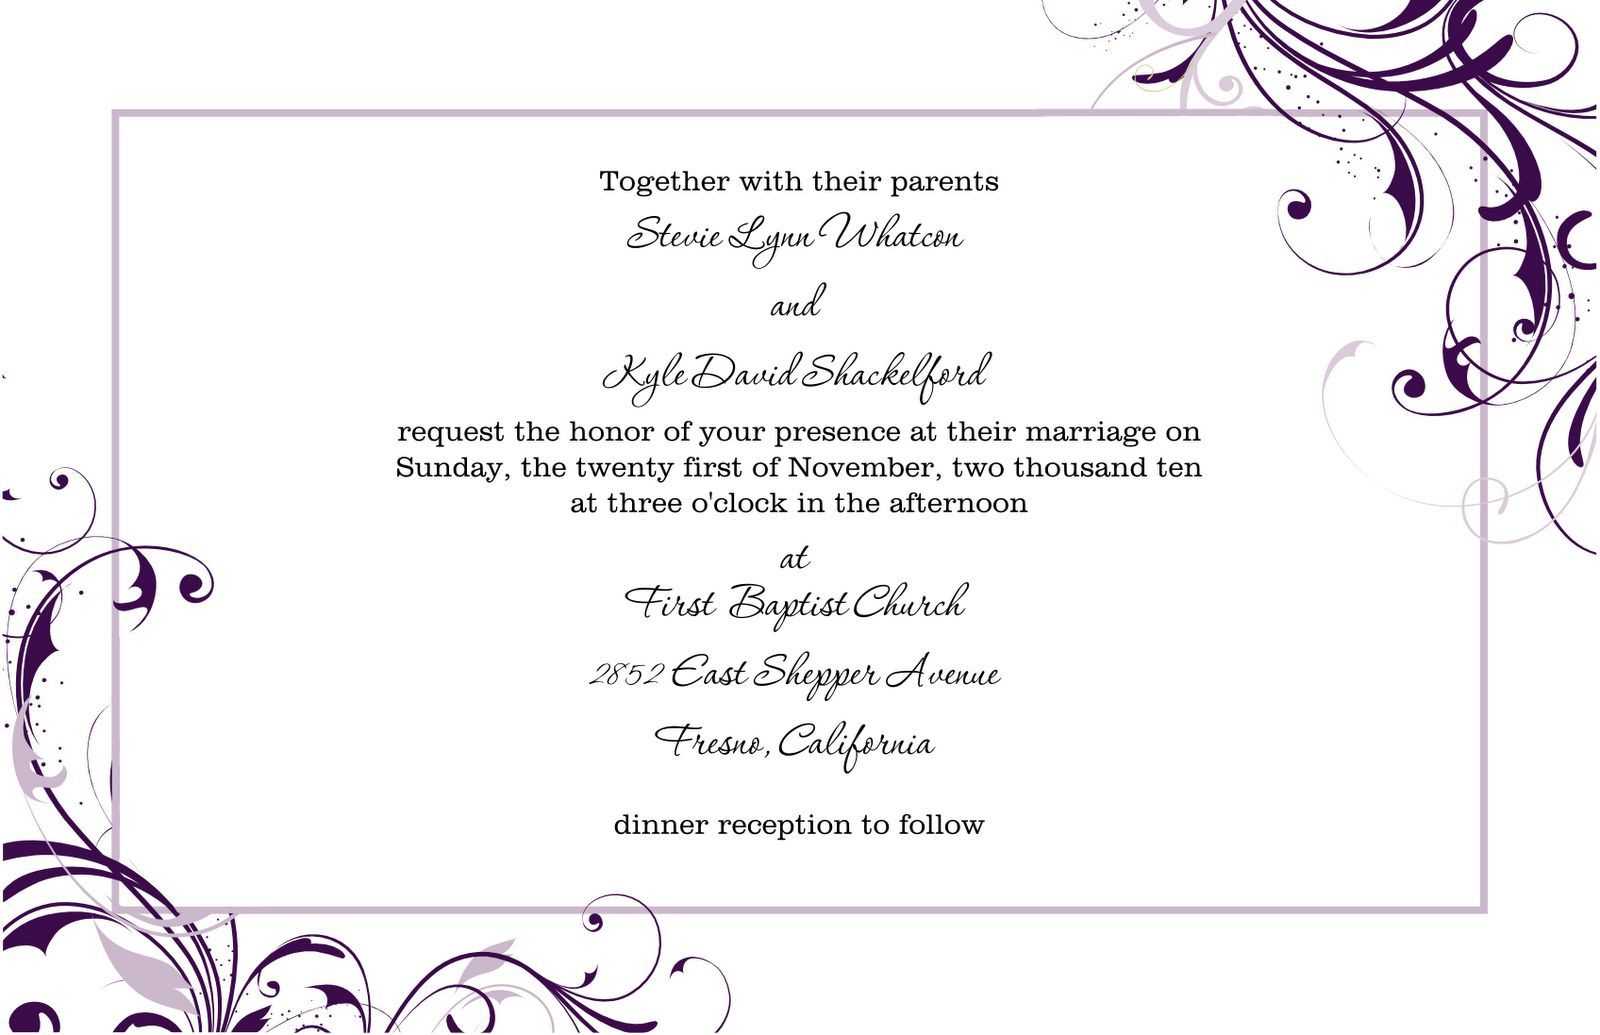 Free Blank Wedding Invitation Templates For Microsoft Word With Regard To Free Dinner Invitation Templates For Word